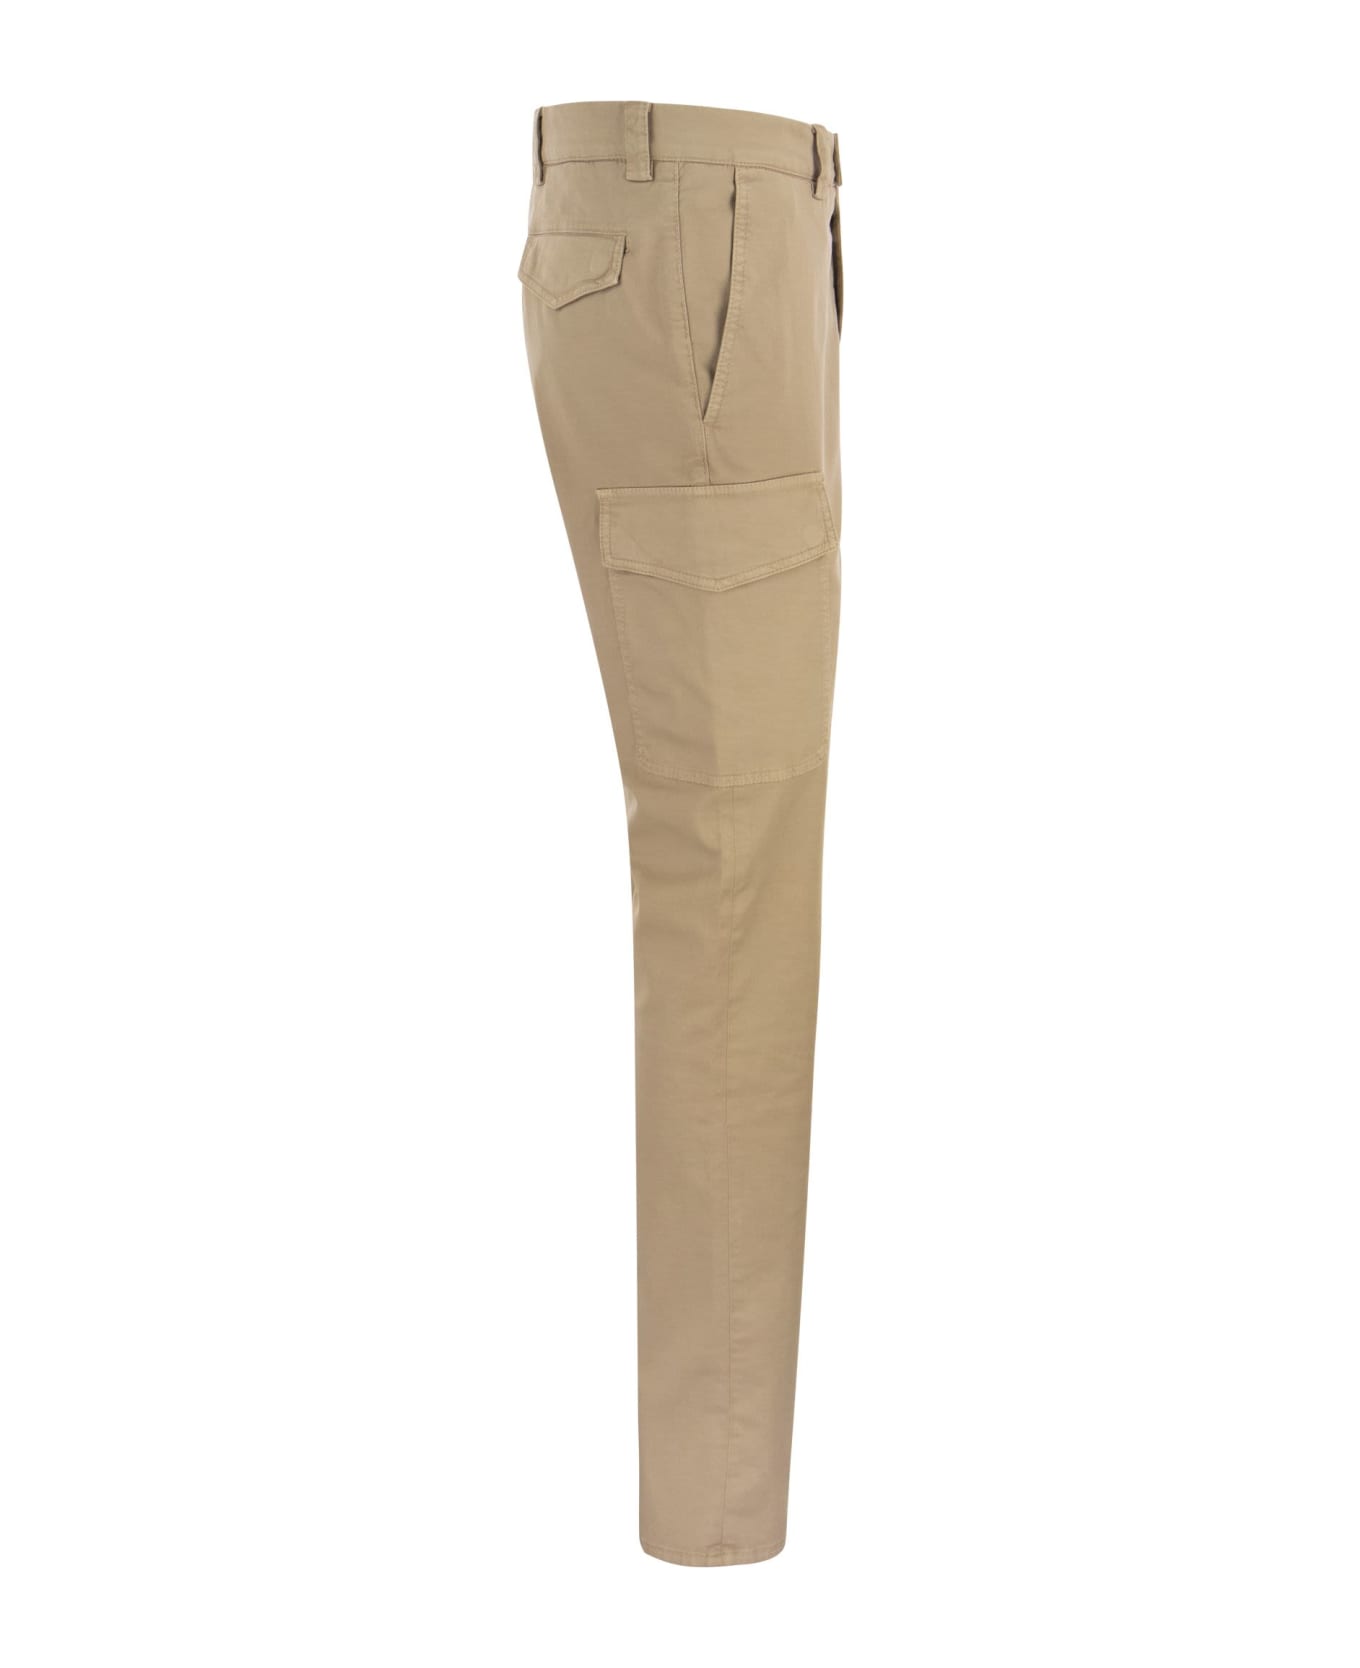 Brunello Cucinelli Garment-dyed Leisure Fit Trousers - Sand